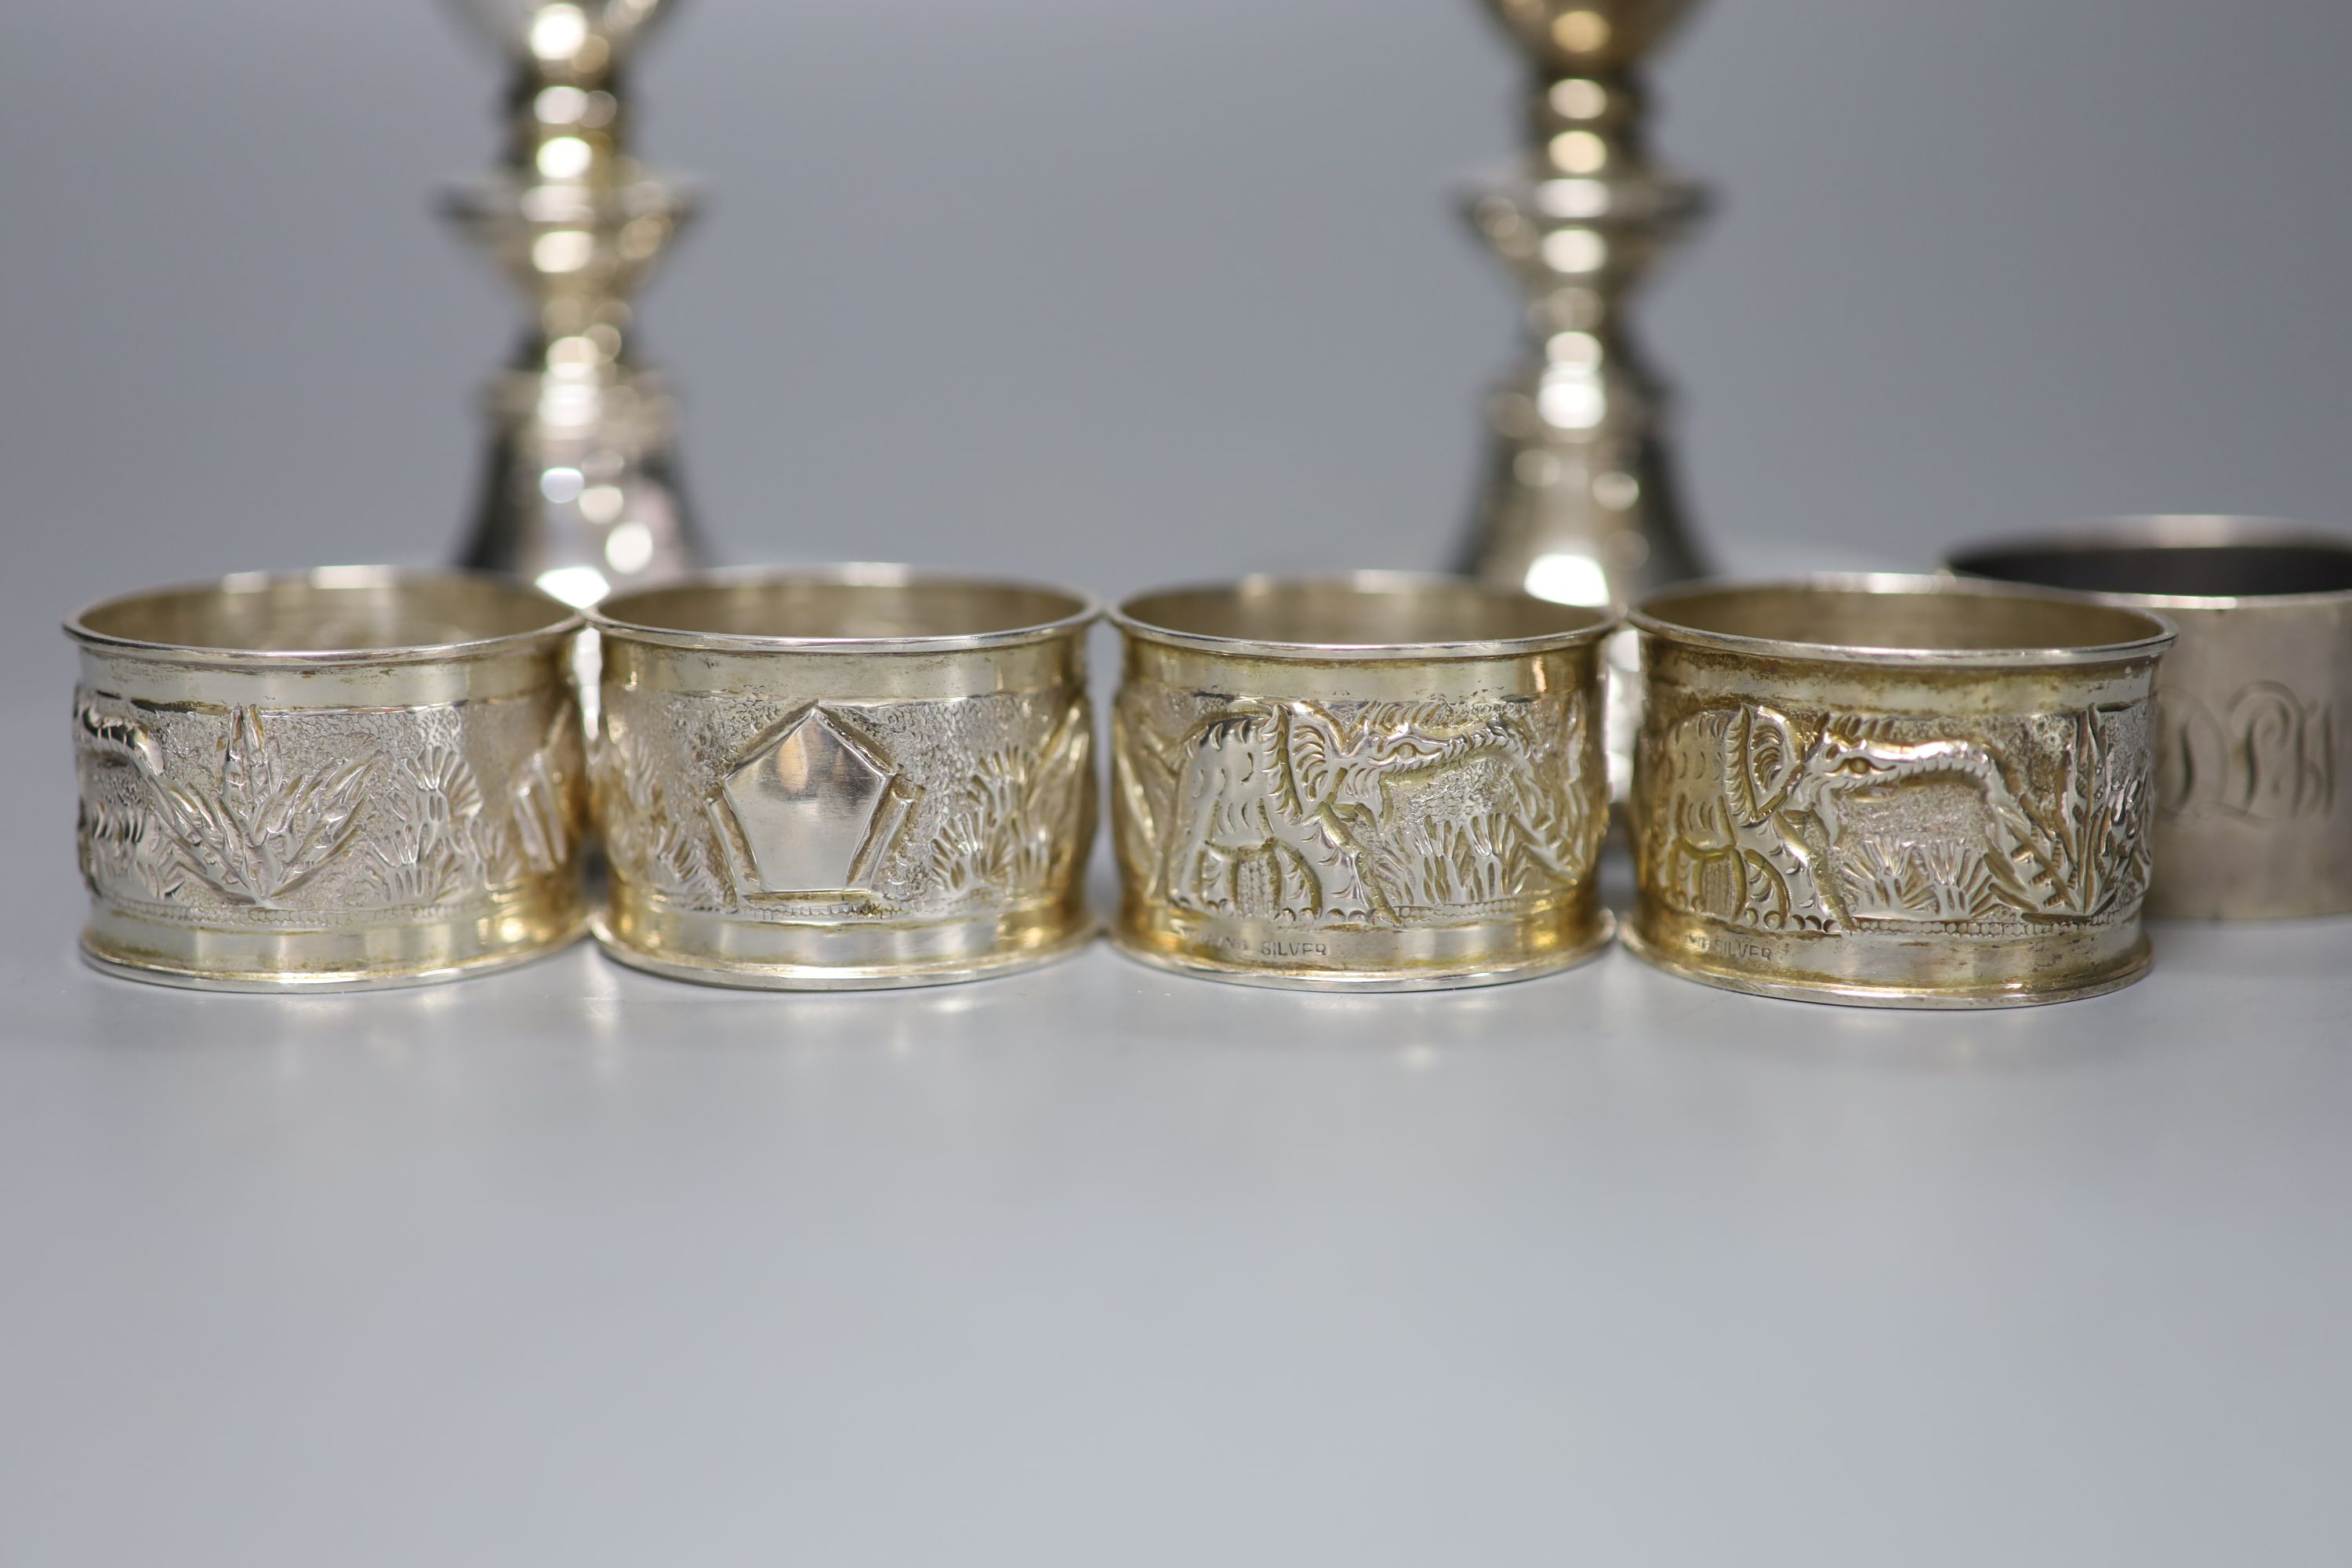 A pair of modern silver dwarf candlesticks, 12cm, a silver napkin ring and four sterling napkin rings.